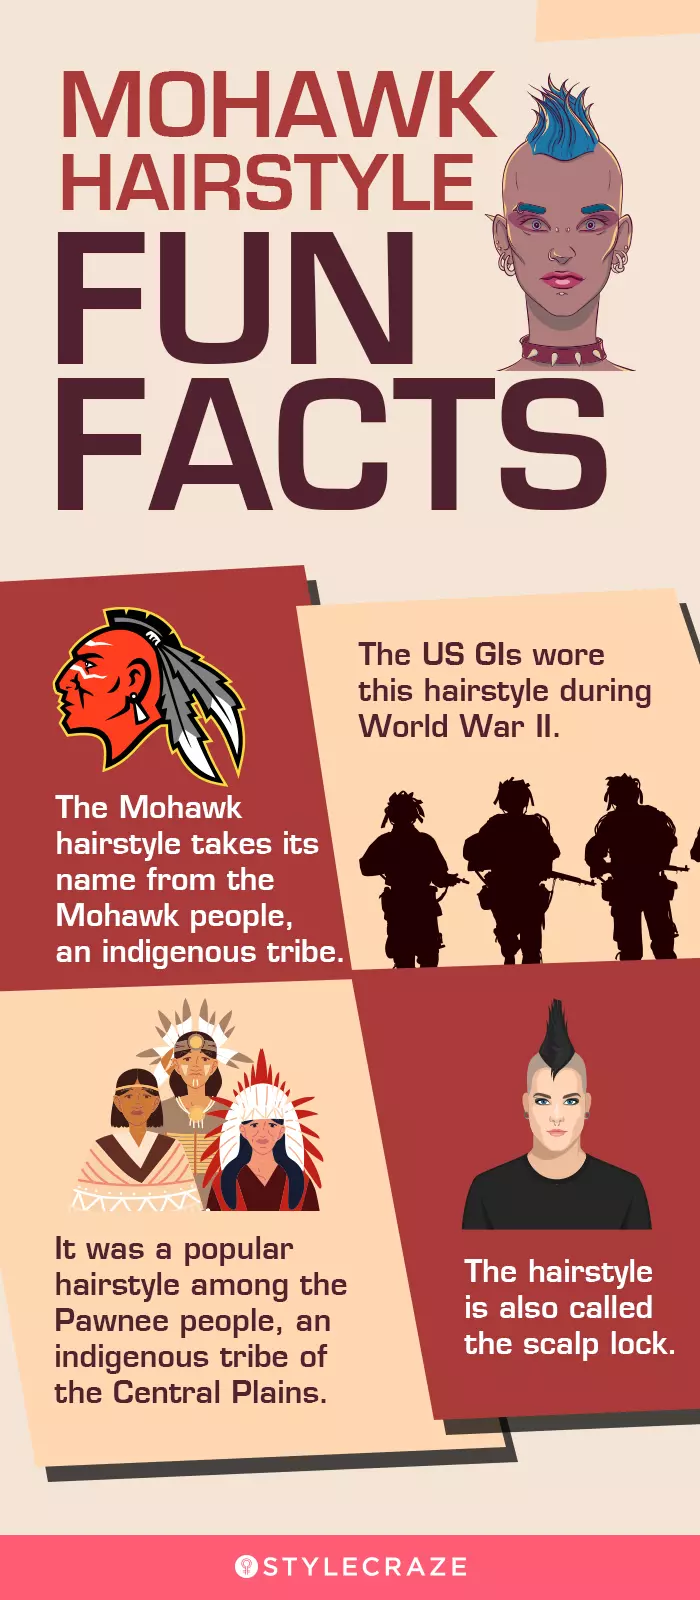 fun facts about mohawk hairstyle (infographic)